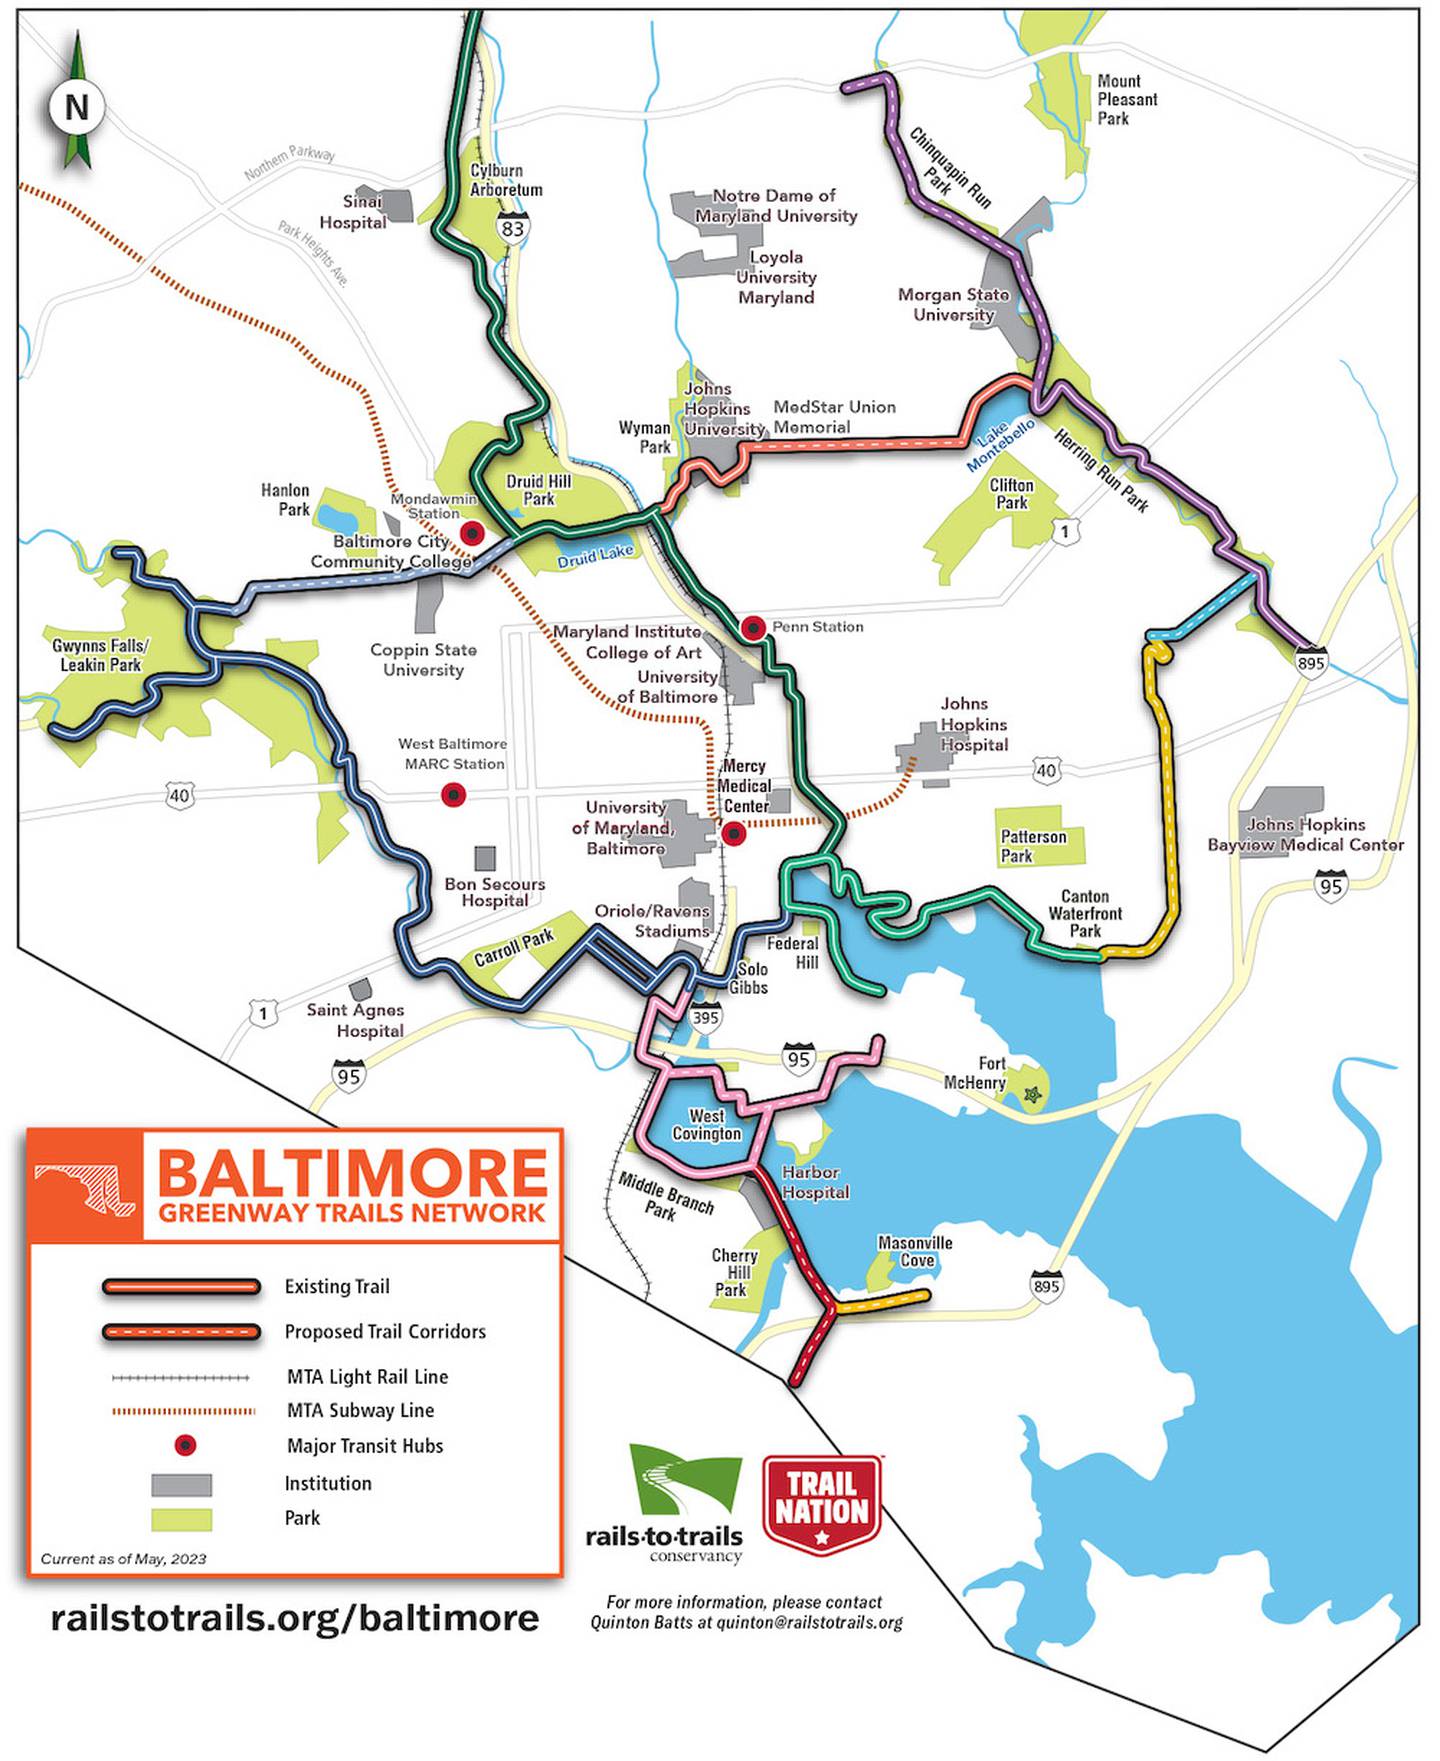 A map of Baltimore City that shows where the different parts of the Baltimore Greenway Trails Network are.